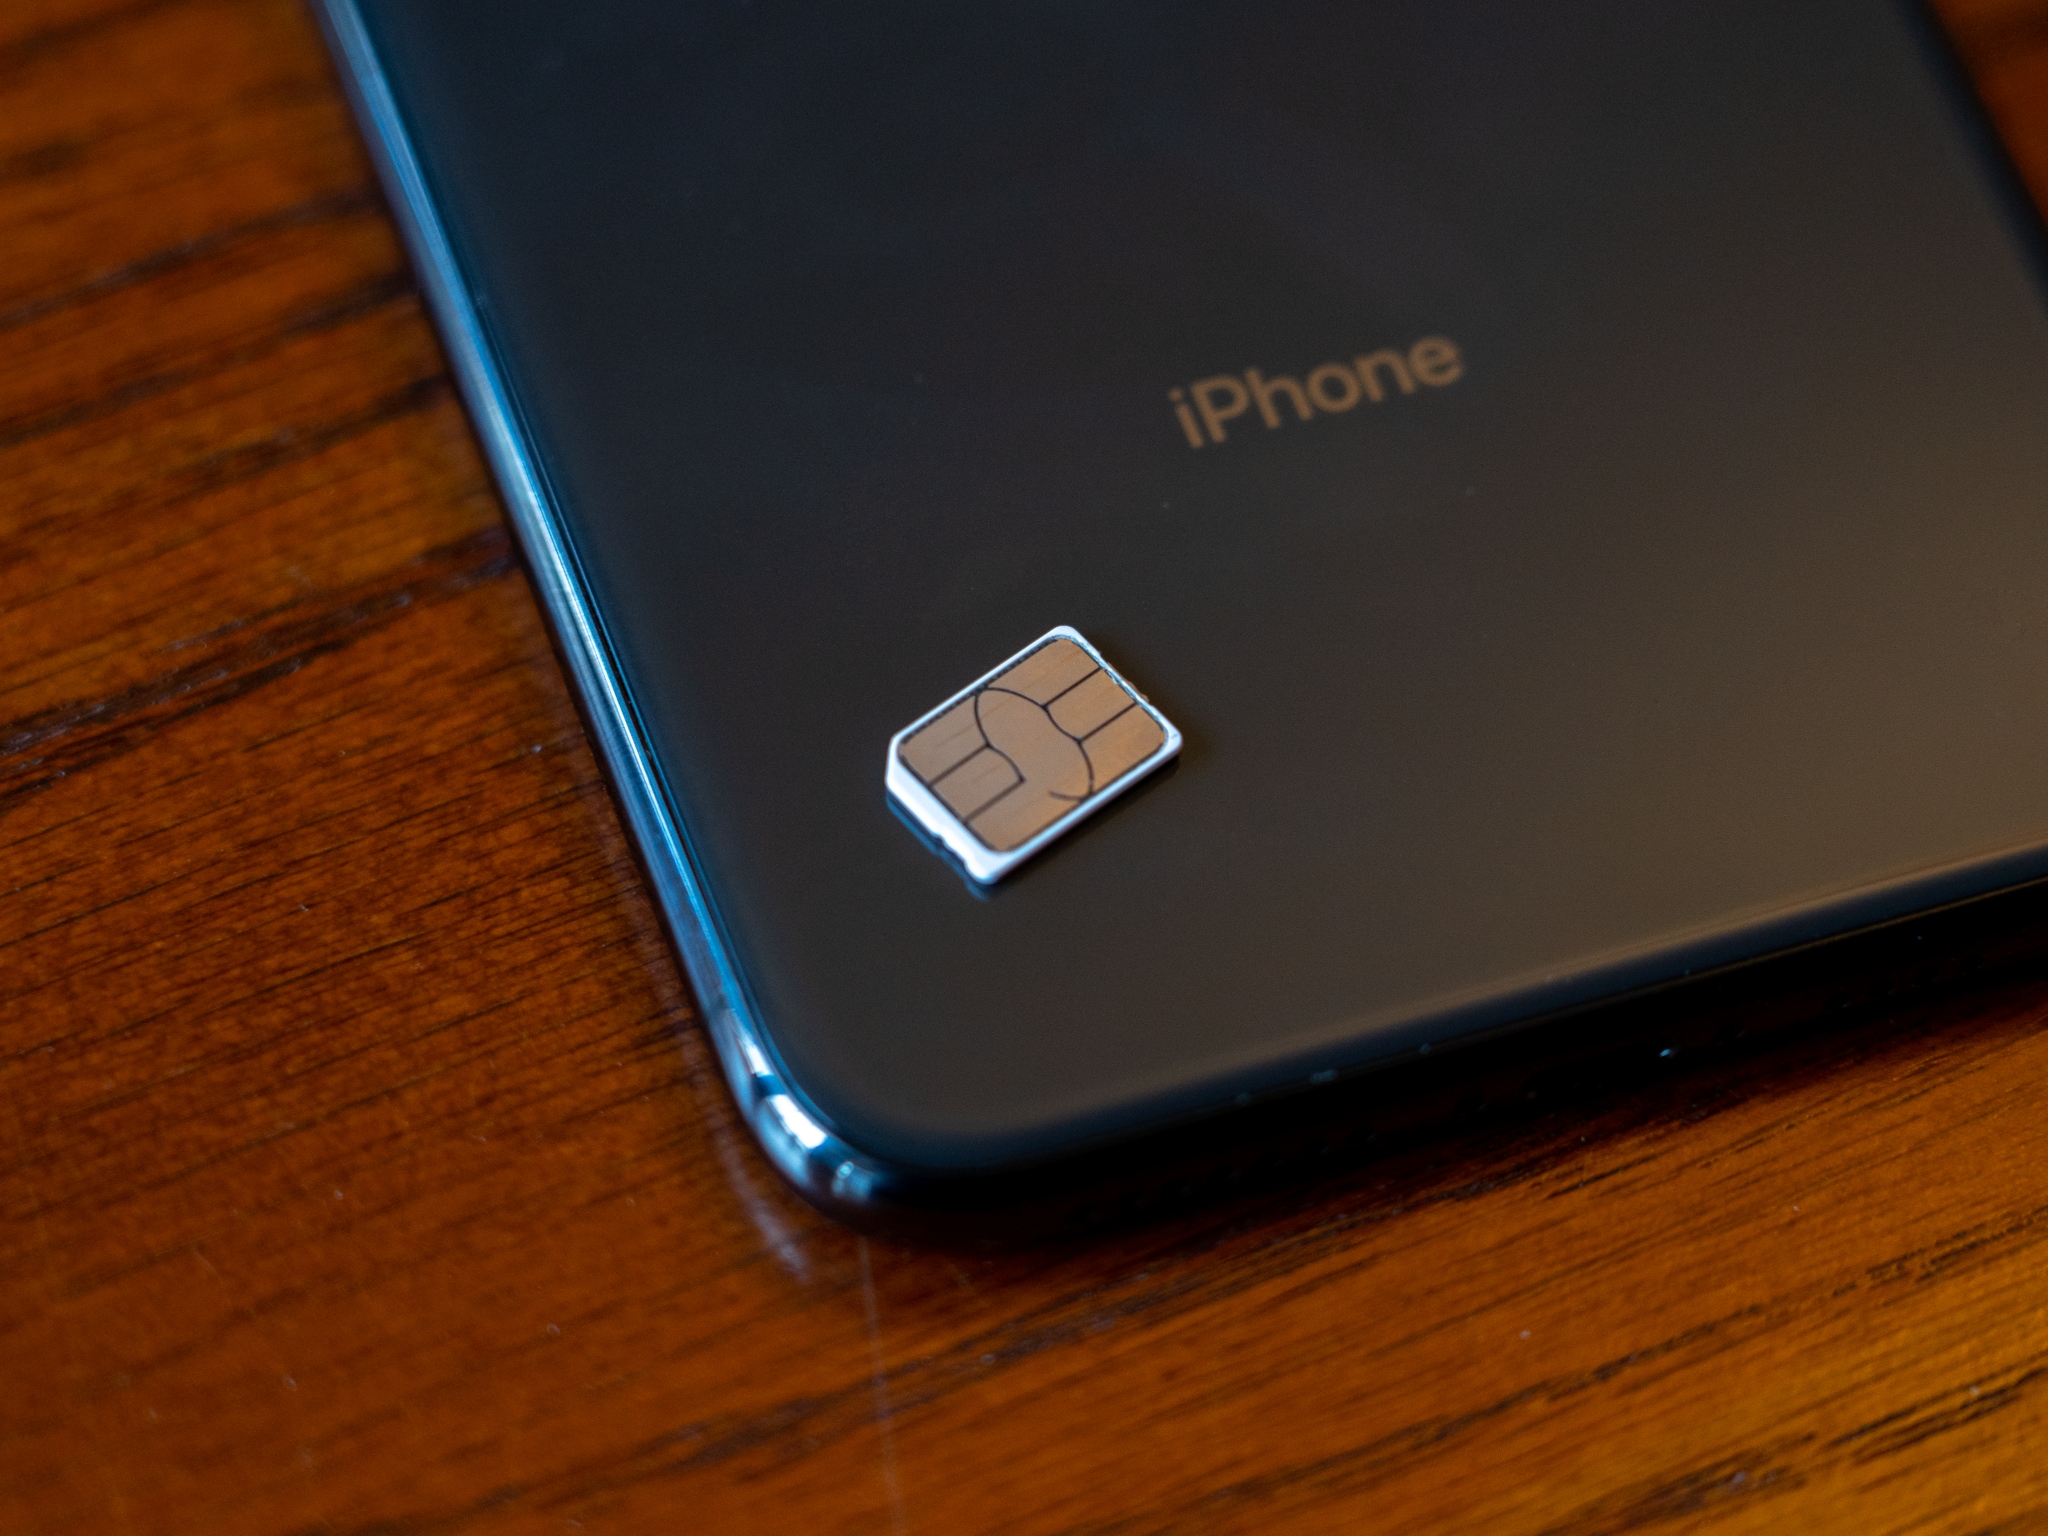 How To Remove The Sim Card In An Iphone Or Ipad Imore